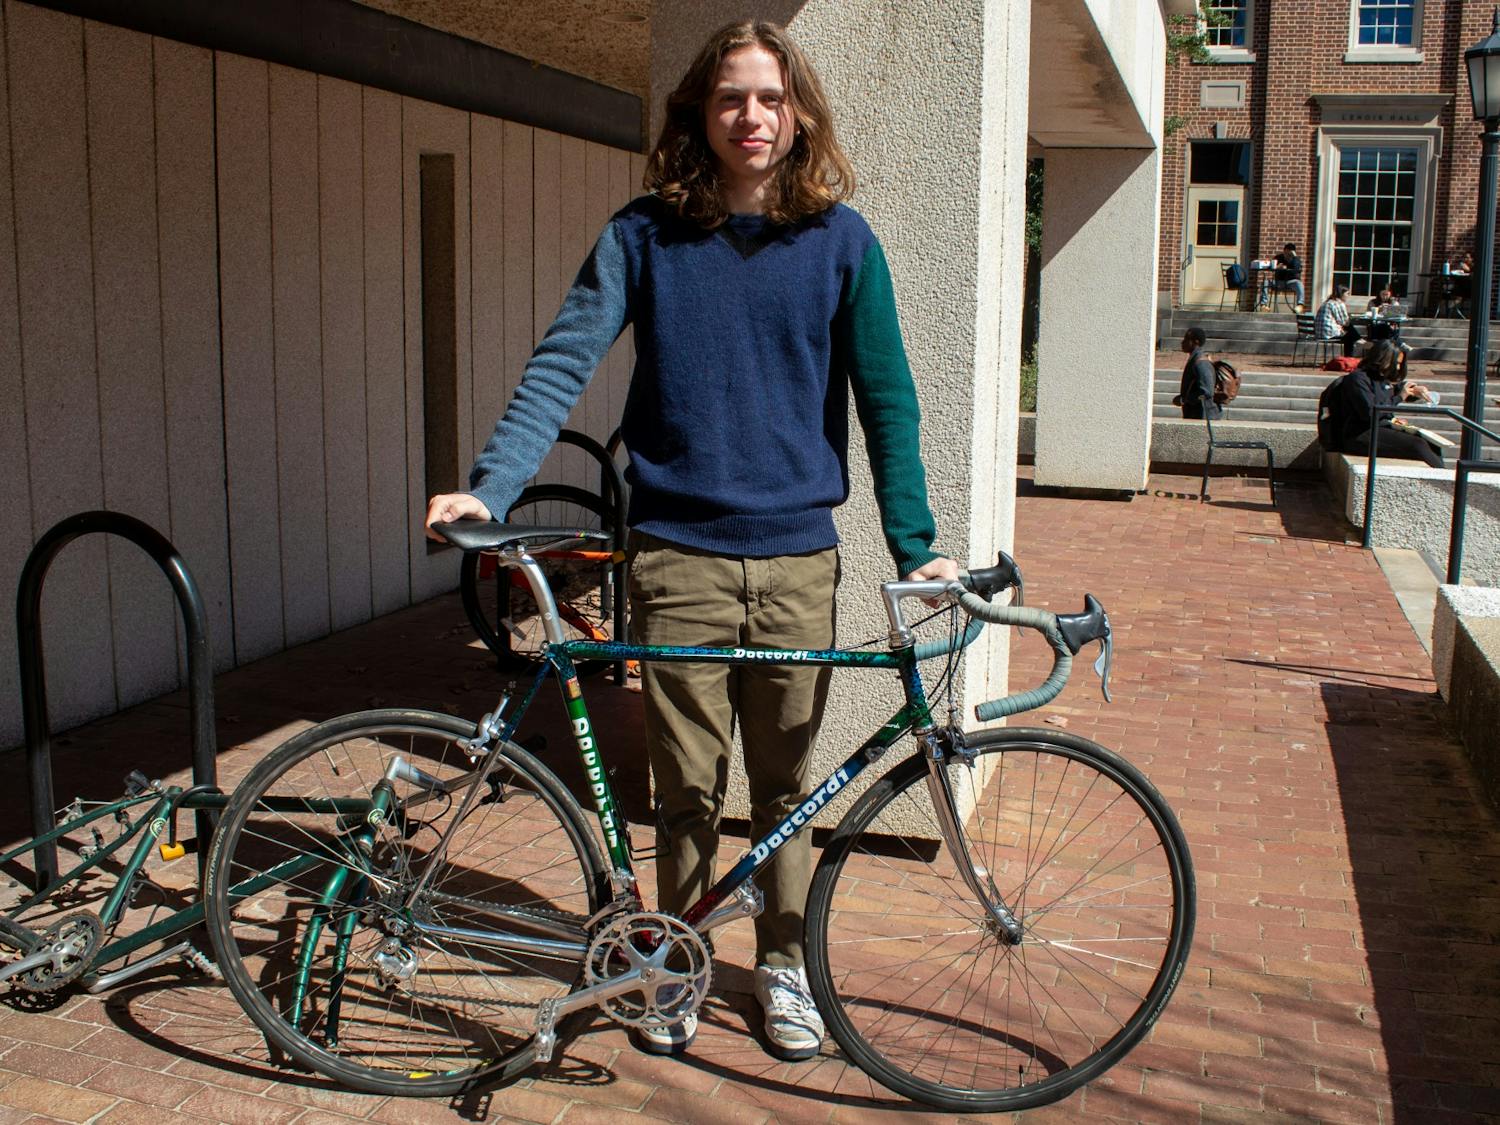 First-year environmental science major Tasso Hartzog poses with his bike outside of Greenlaw Hall. Tasso was injured after being hit by a car while riding his bike but still relies on his bike for local transportation.